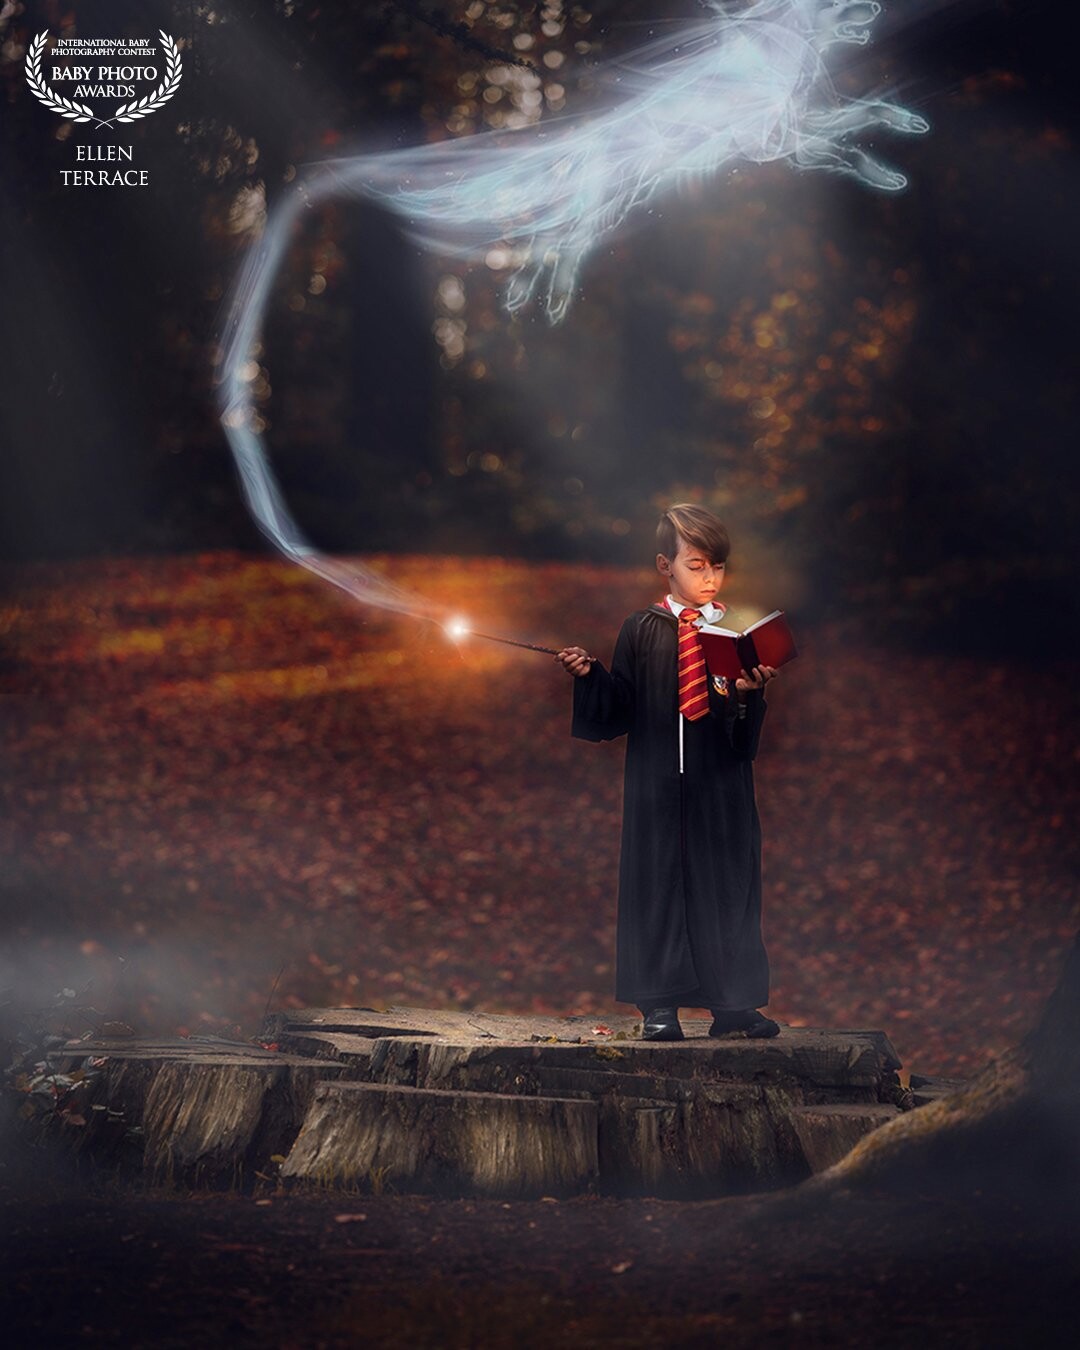 I have been in love with the Harry Potter books and movies since they came out.<br />
Lucky for me, my 8-year-old son loves them as well.<br />
When we rewatched the movies this Halloween, I had this wonderful image in my head for a new fantasy photo. So, we took a walk to the park nearby and got to work.<br />
His favourite animal is a wolf, so I quickly decided on the patronus I wanted.<br />
I absolutely adore making this kind of fine art fantasy photographs.<br />
<br />
Thank you so much for this award!